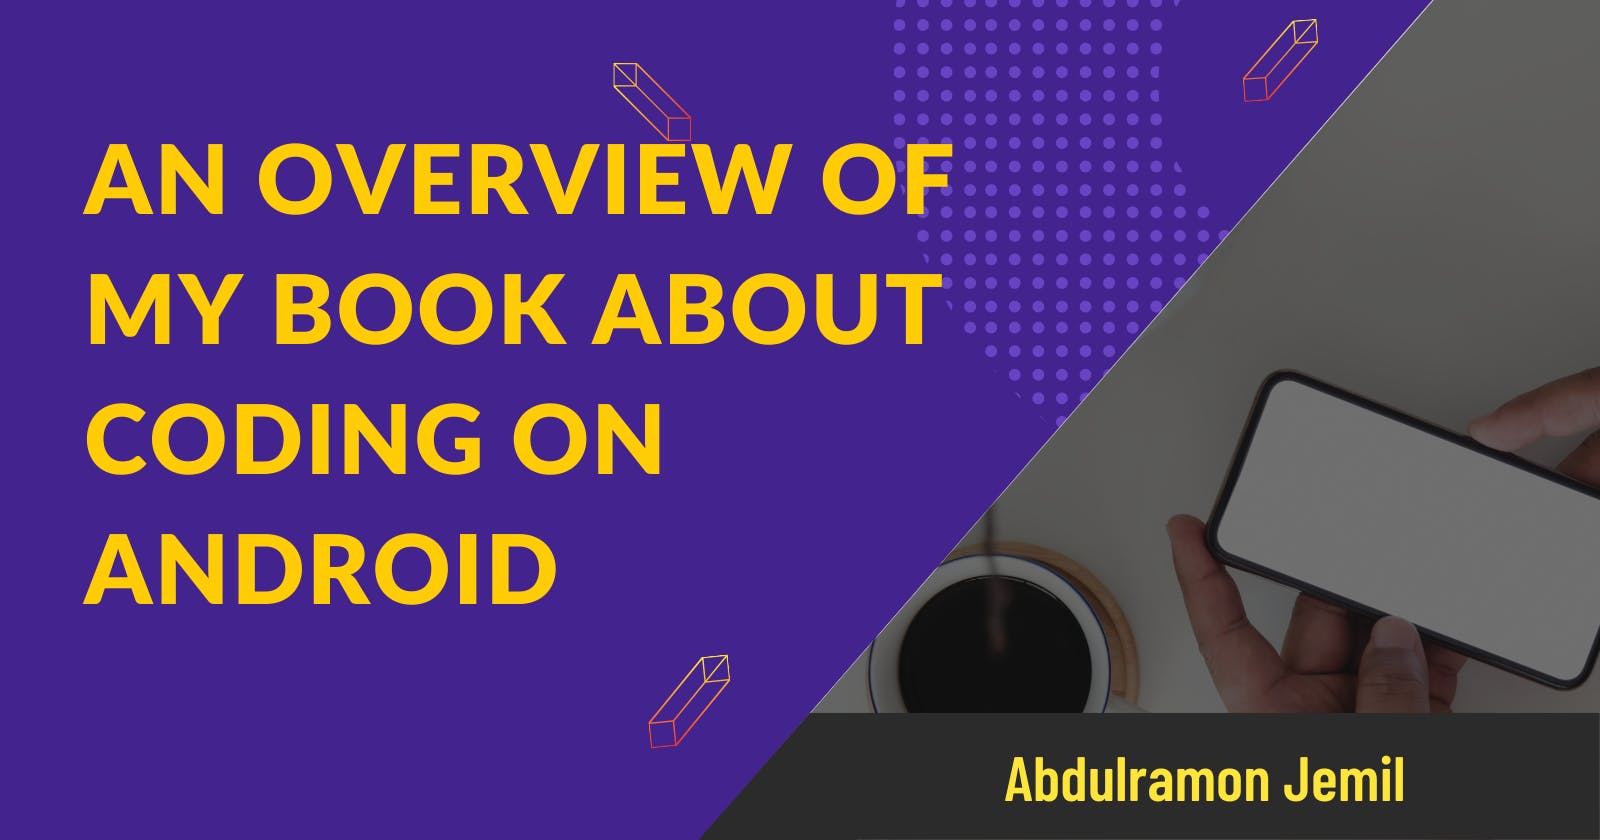 An overview of my book about coding on Android